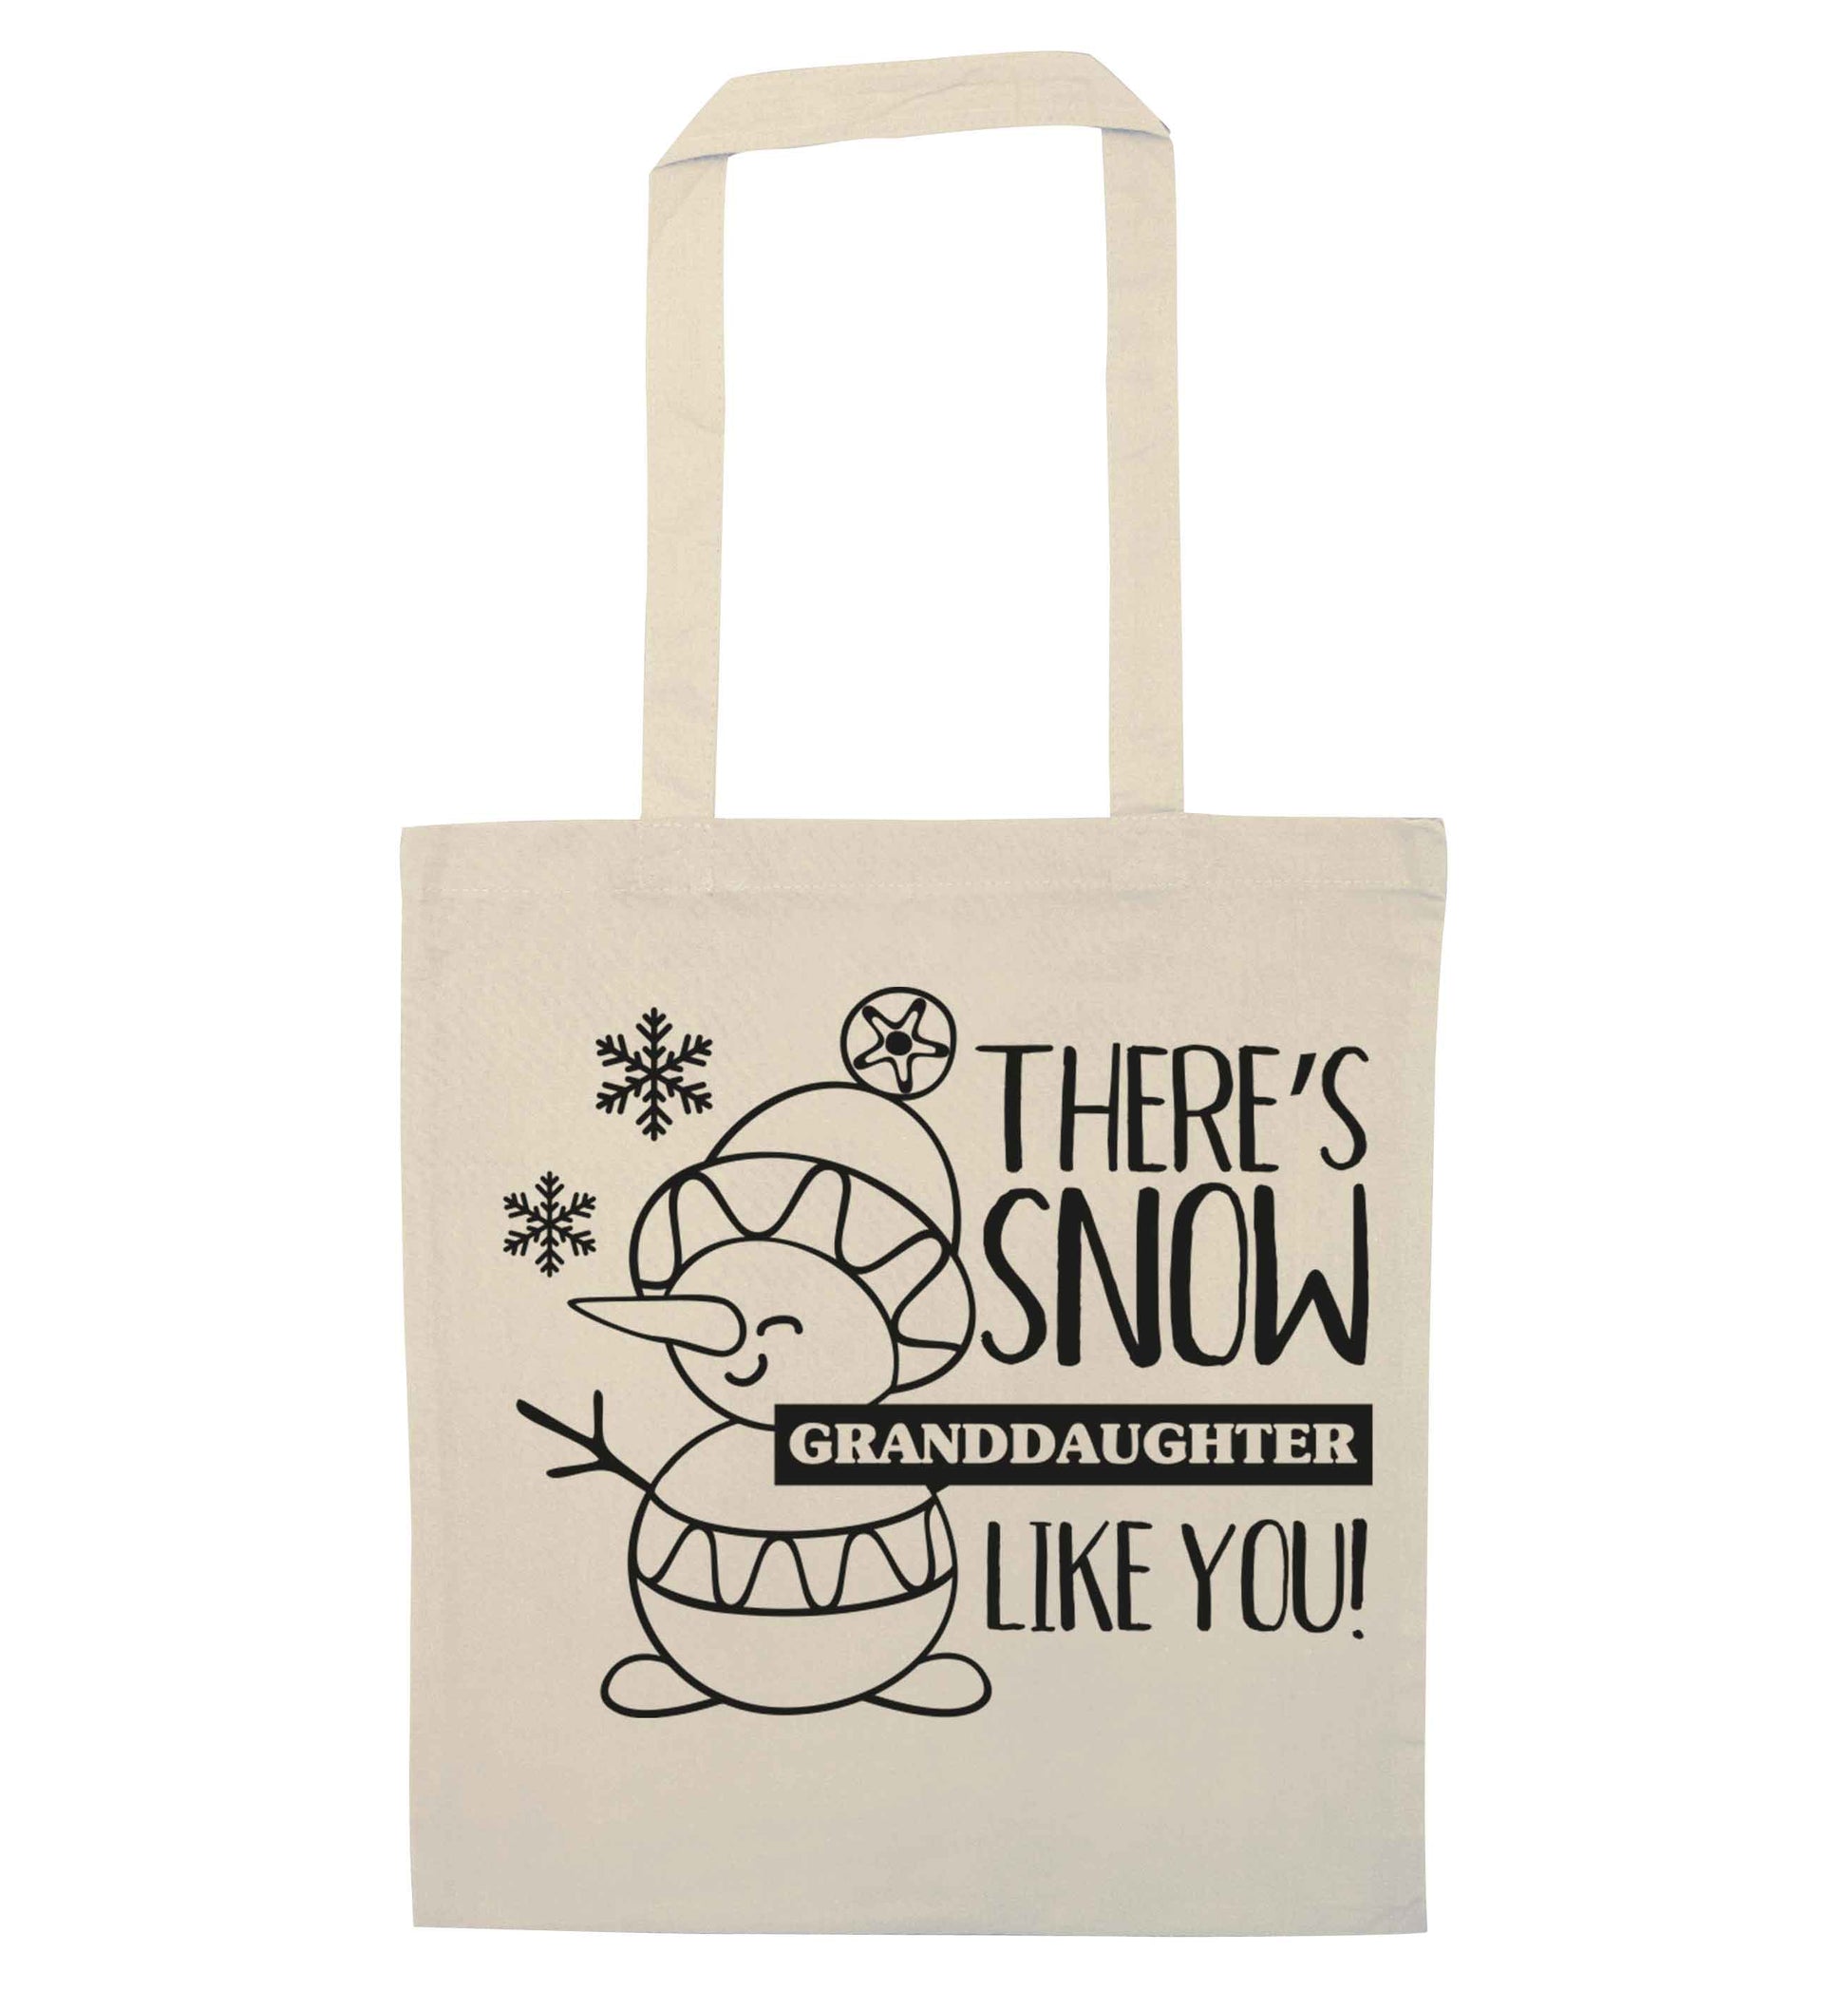 There's snow granddaughter like you natural tote bag